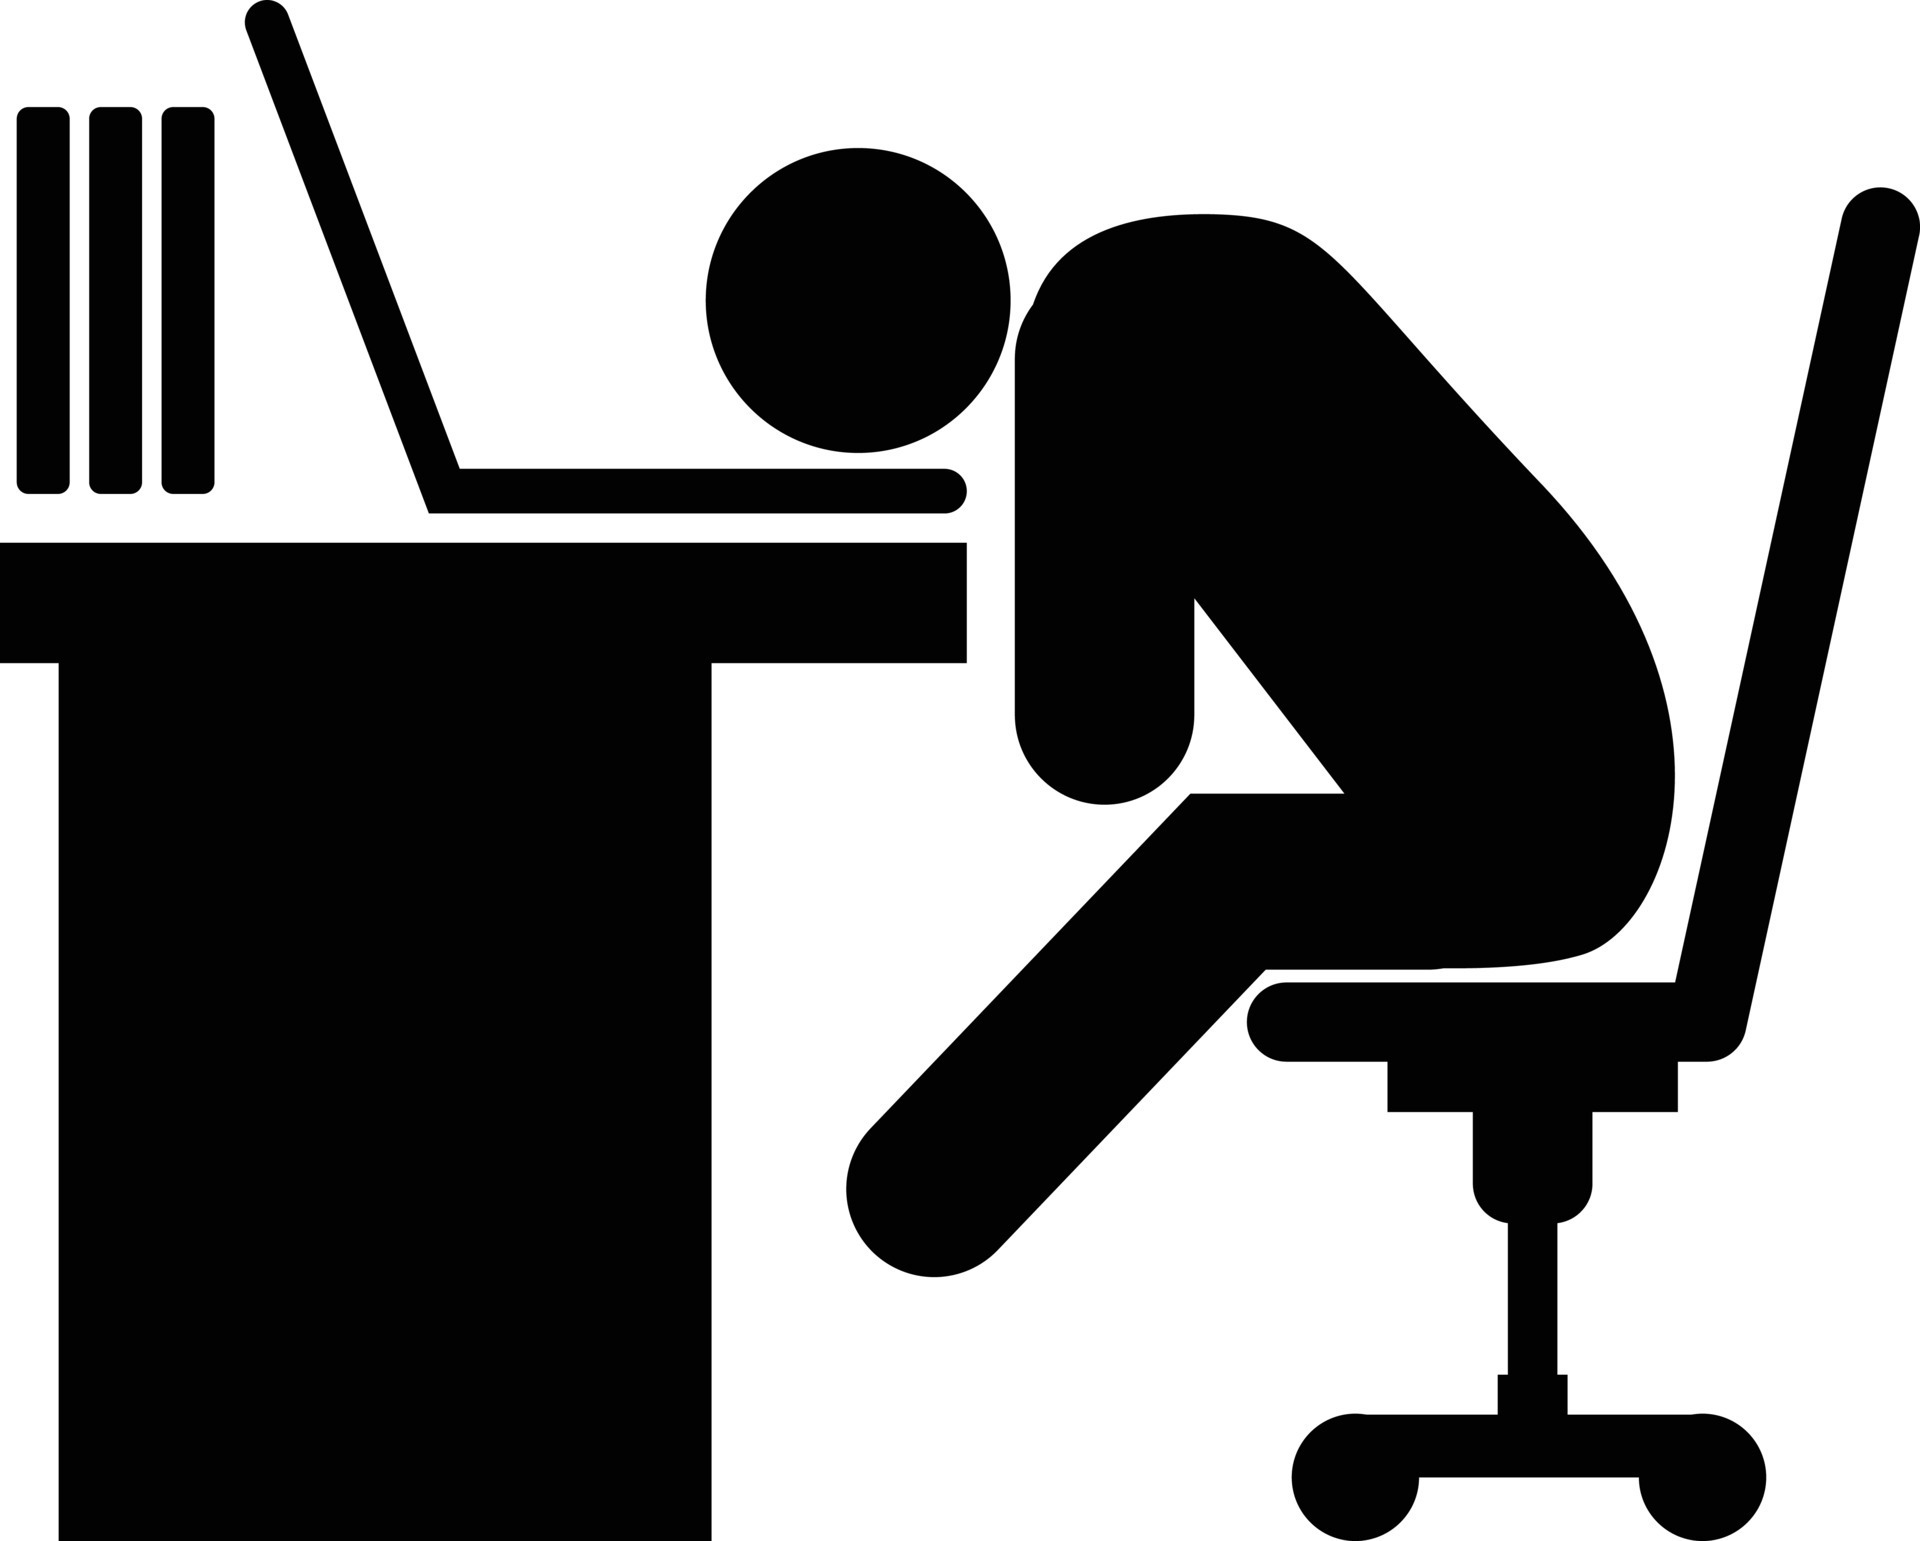 overworked and tired businessman icon. office worker sits in a chair ...